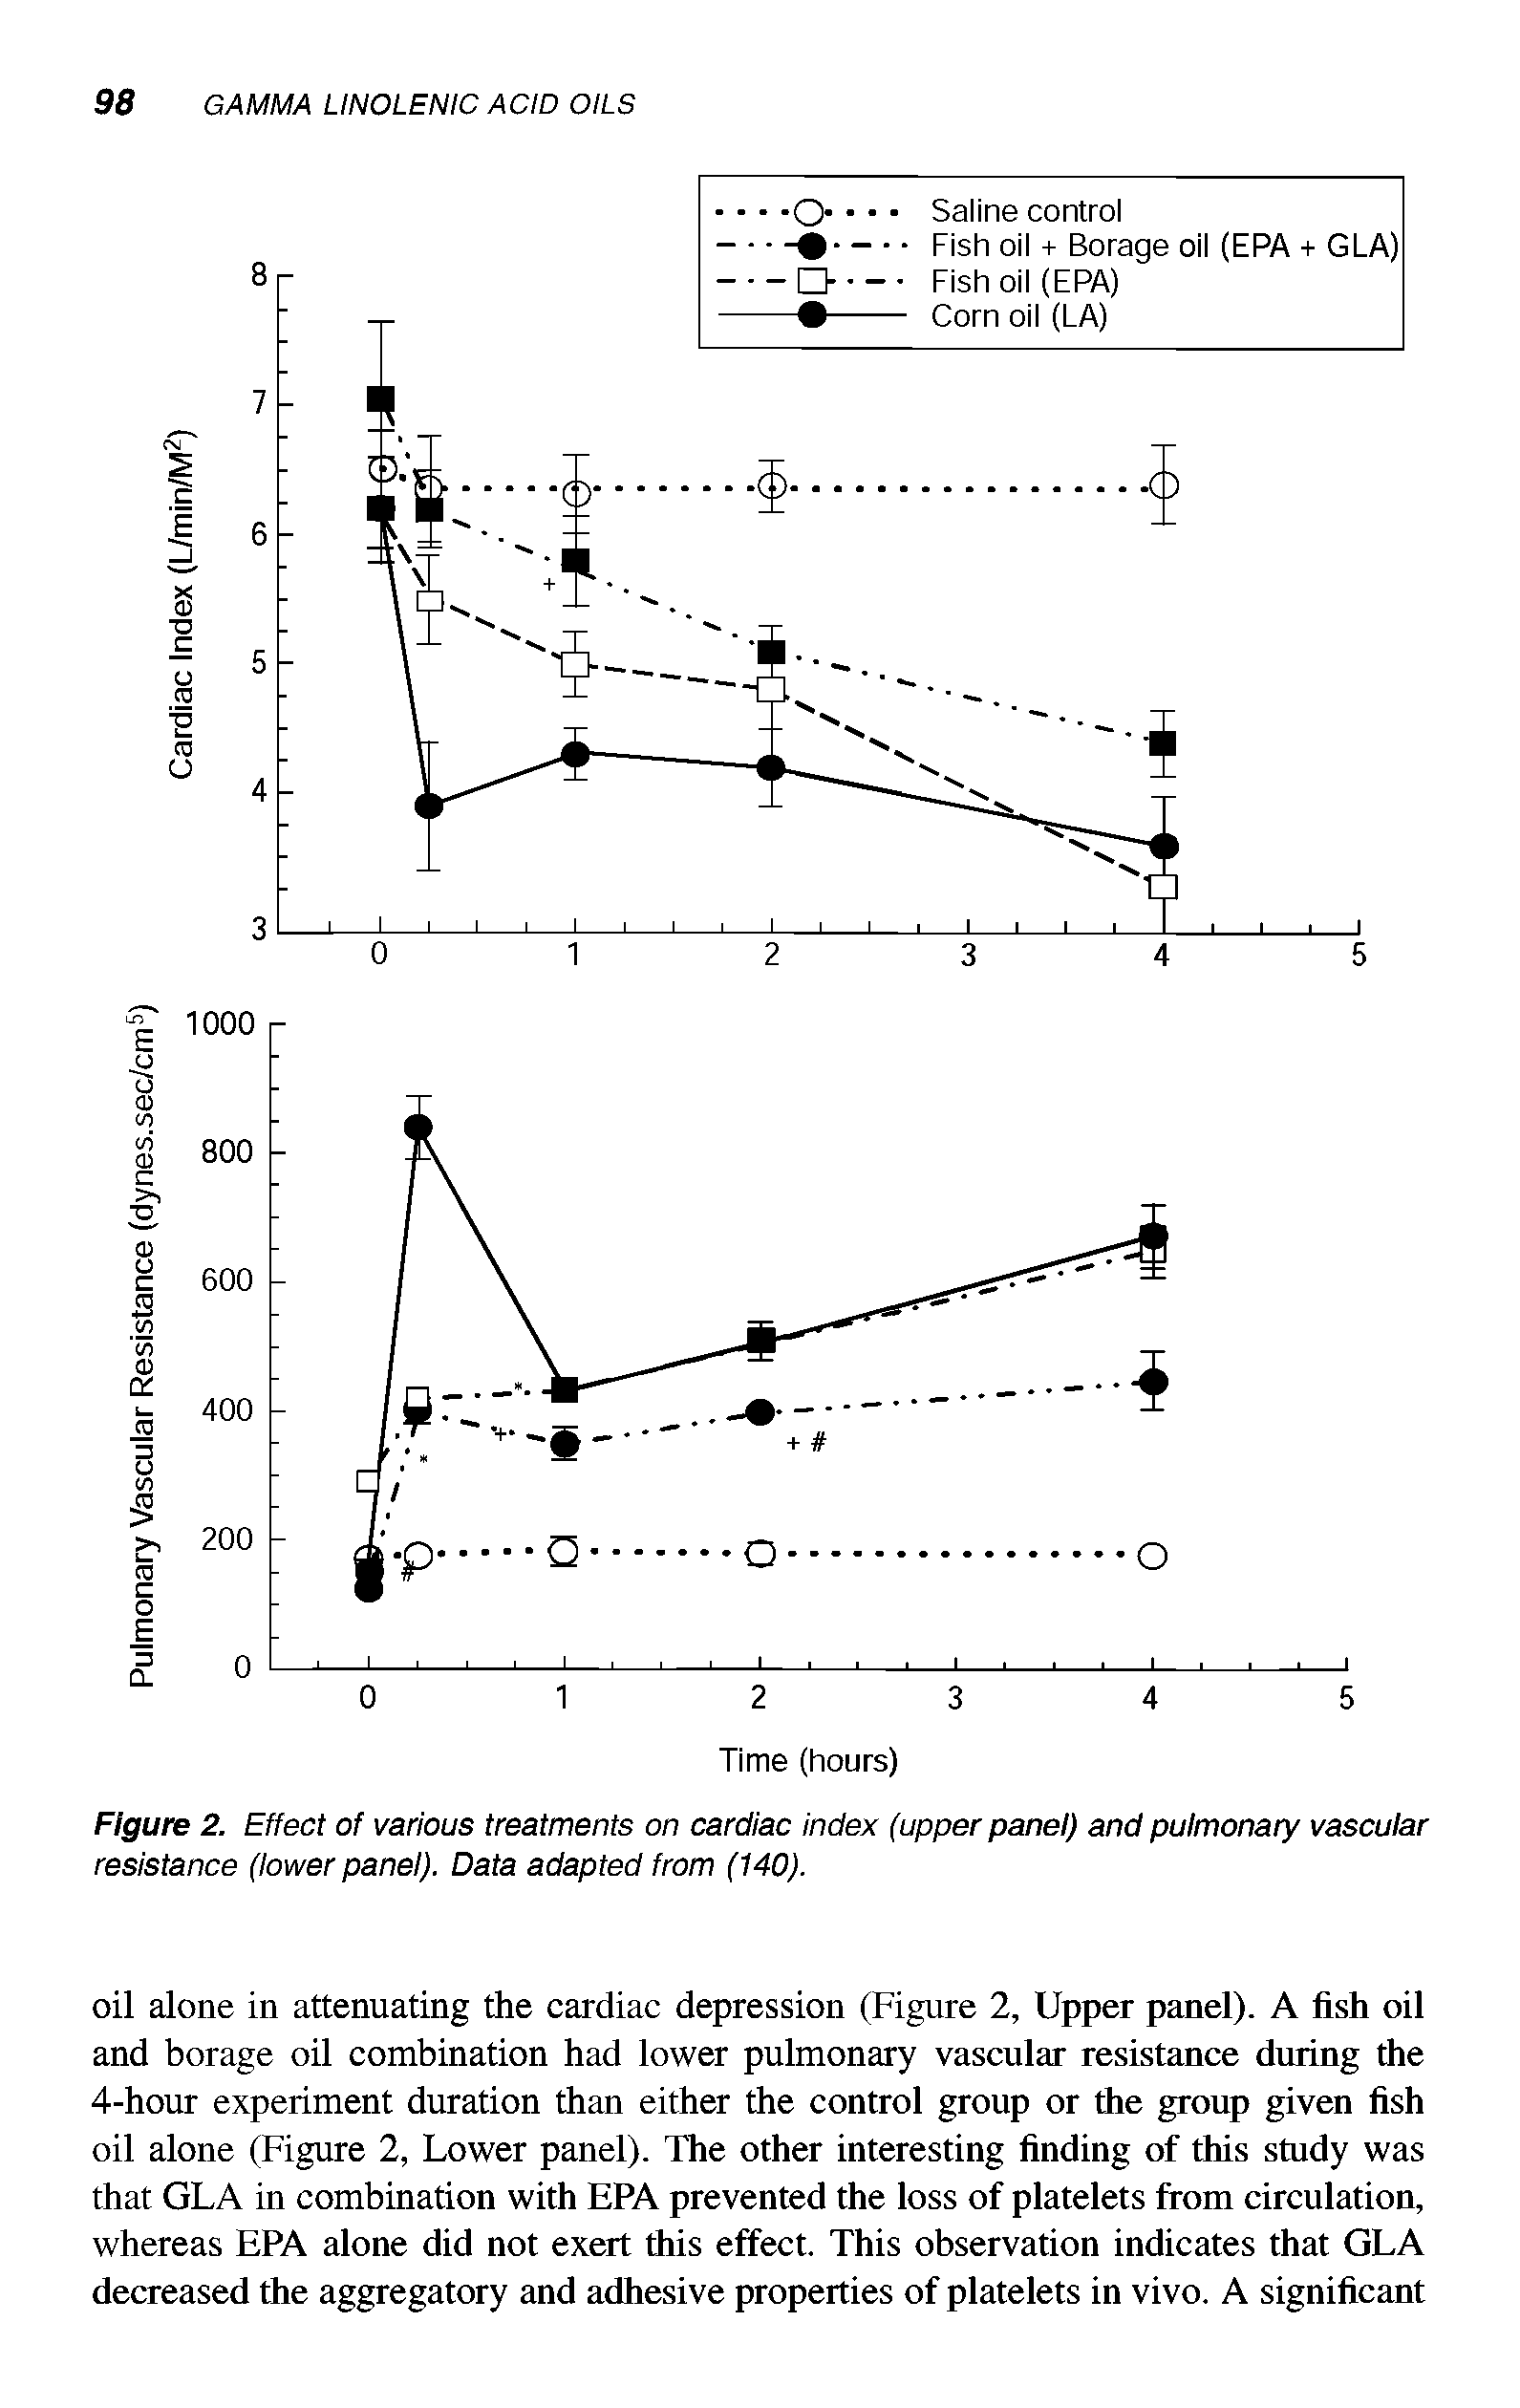 Figure 2. Effect of various treatments on cardiac index (upper panel) and pulmonary vascular resistance (lower panel). Data adapted from (140).